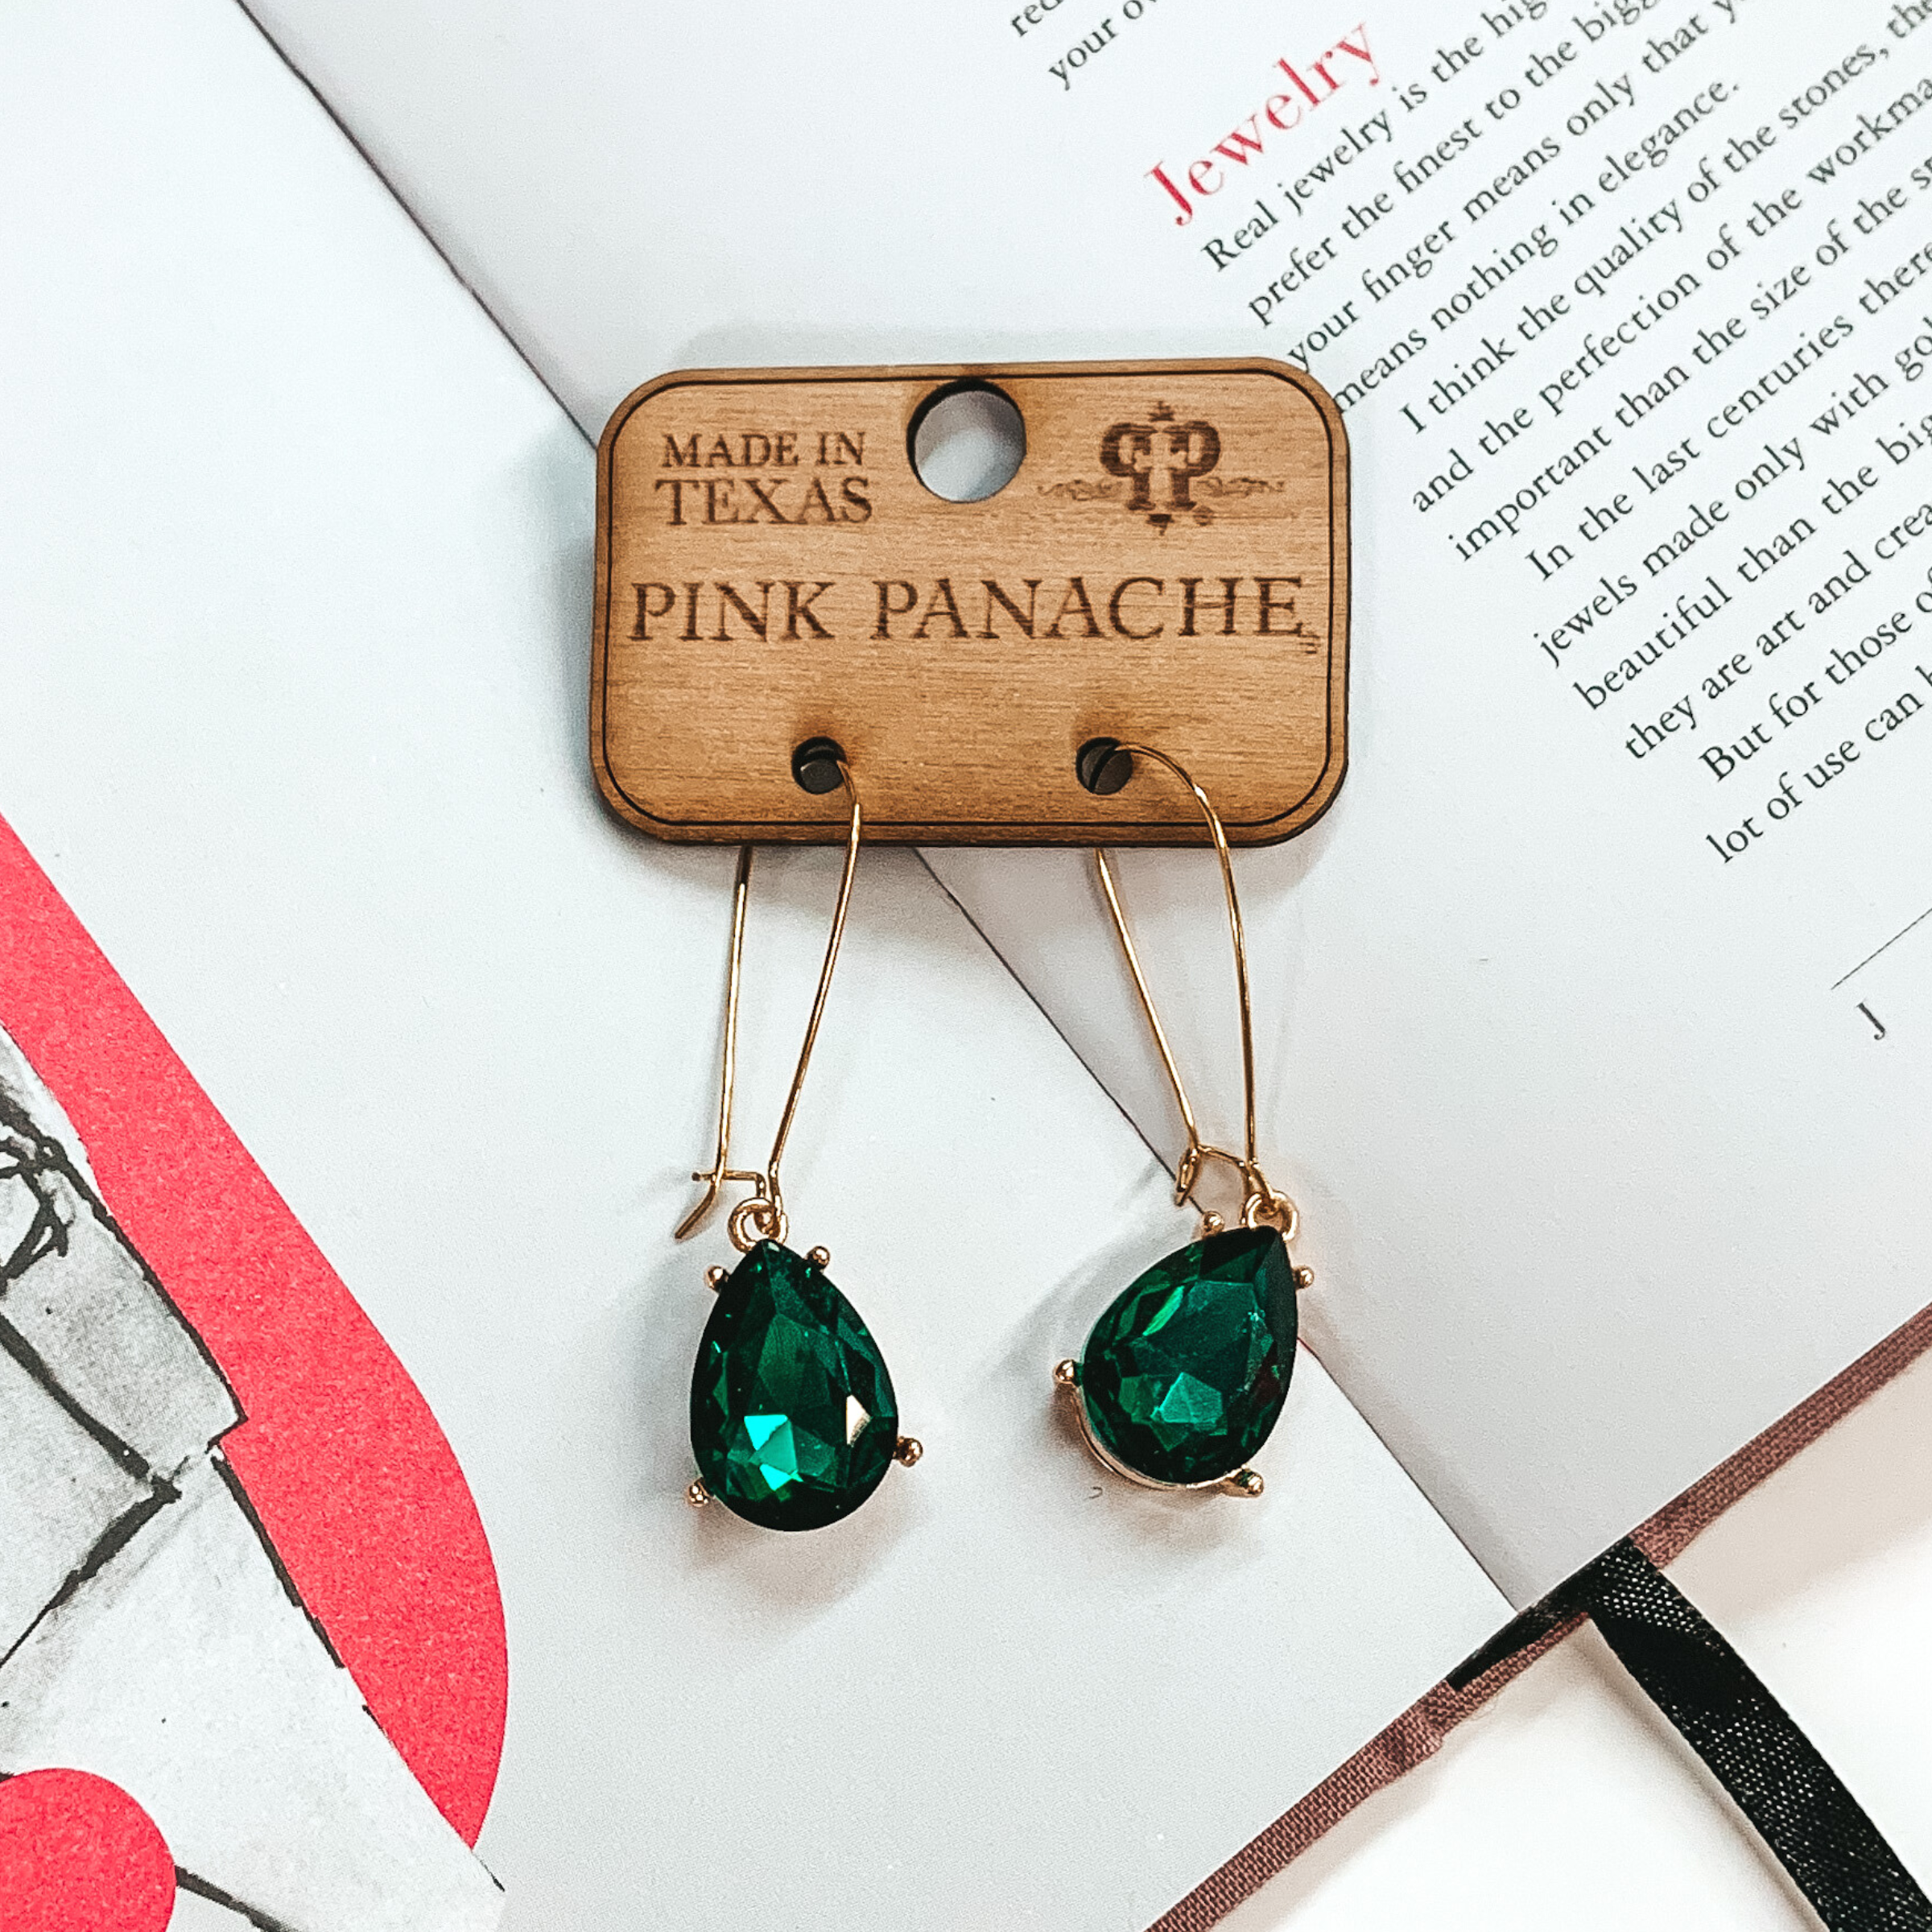 Gold kidney wire earrings with a hanging teardrop emerald crystal pendant. These earrings are pictured on an open book.